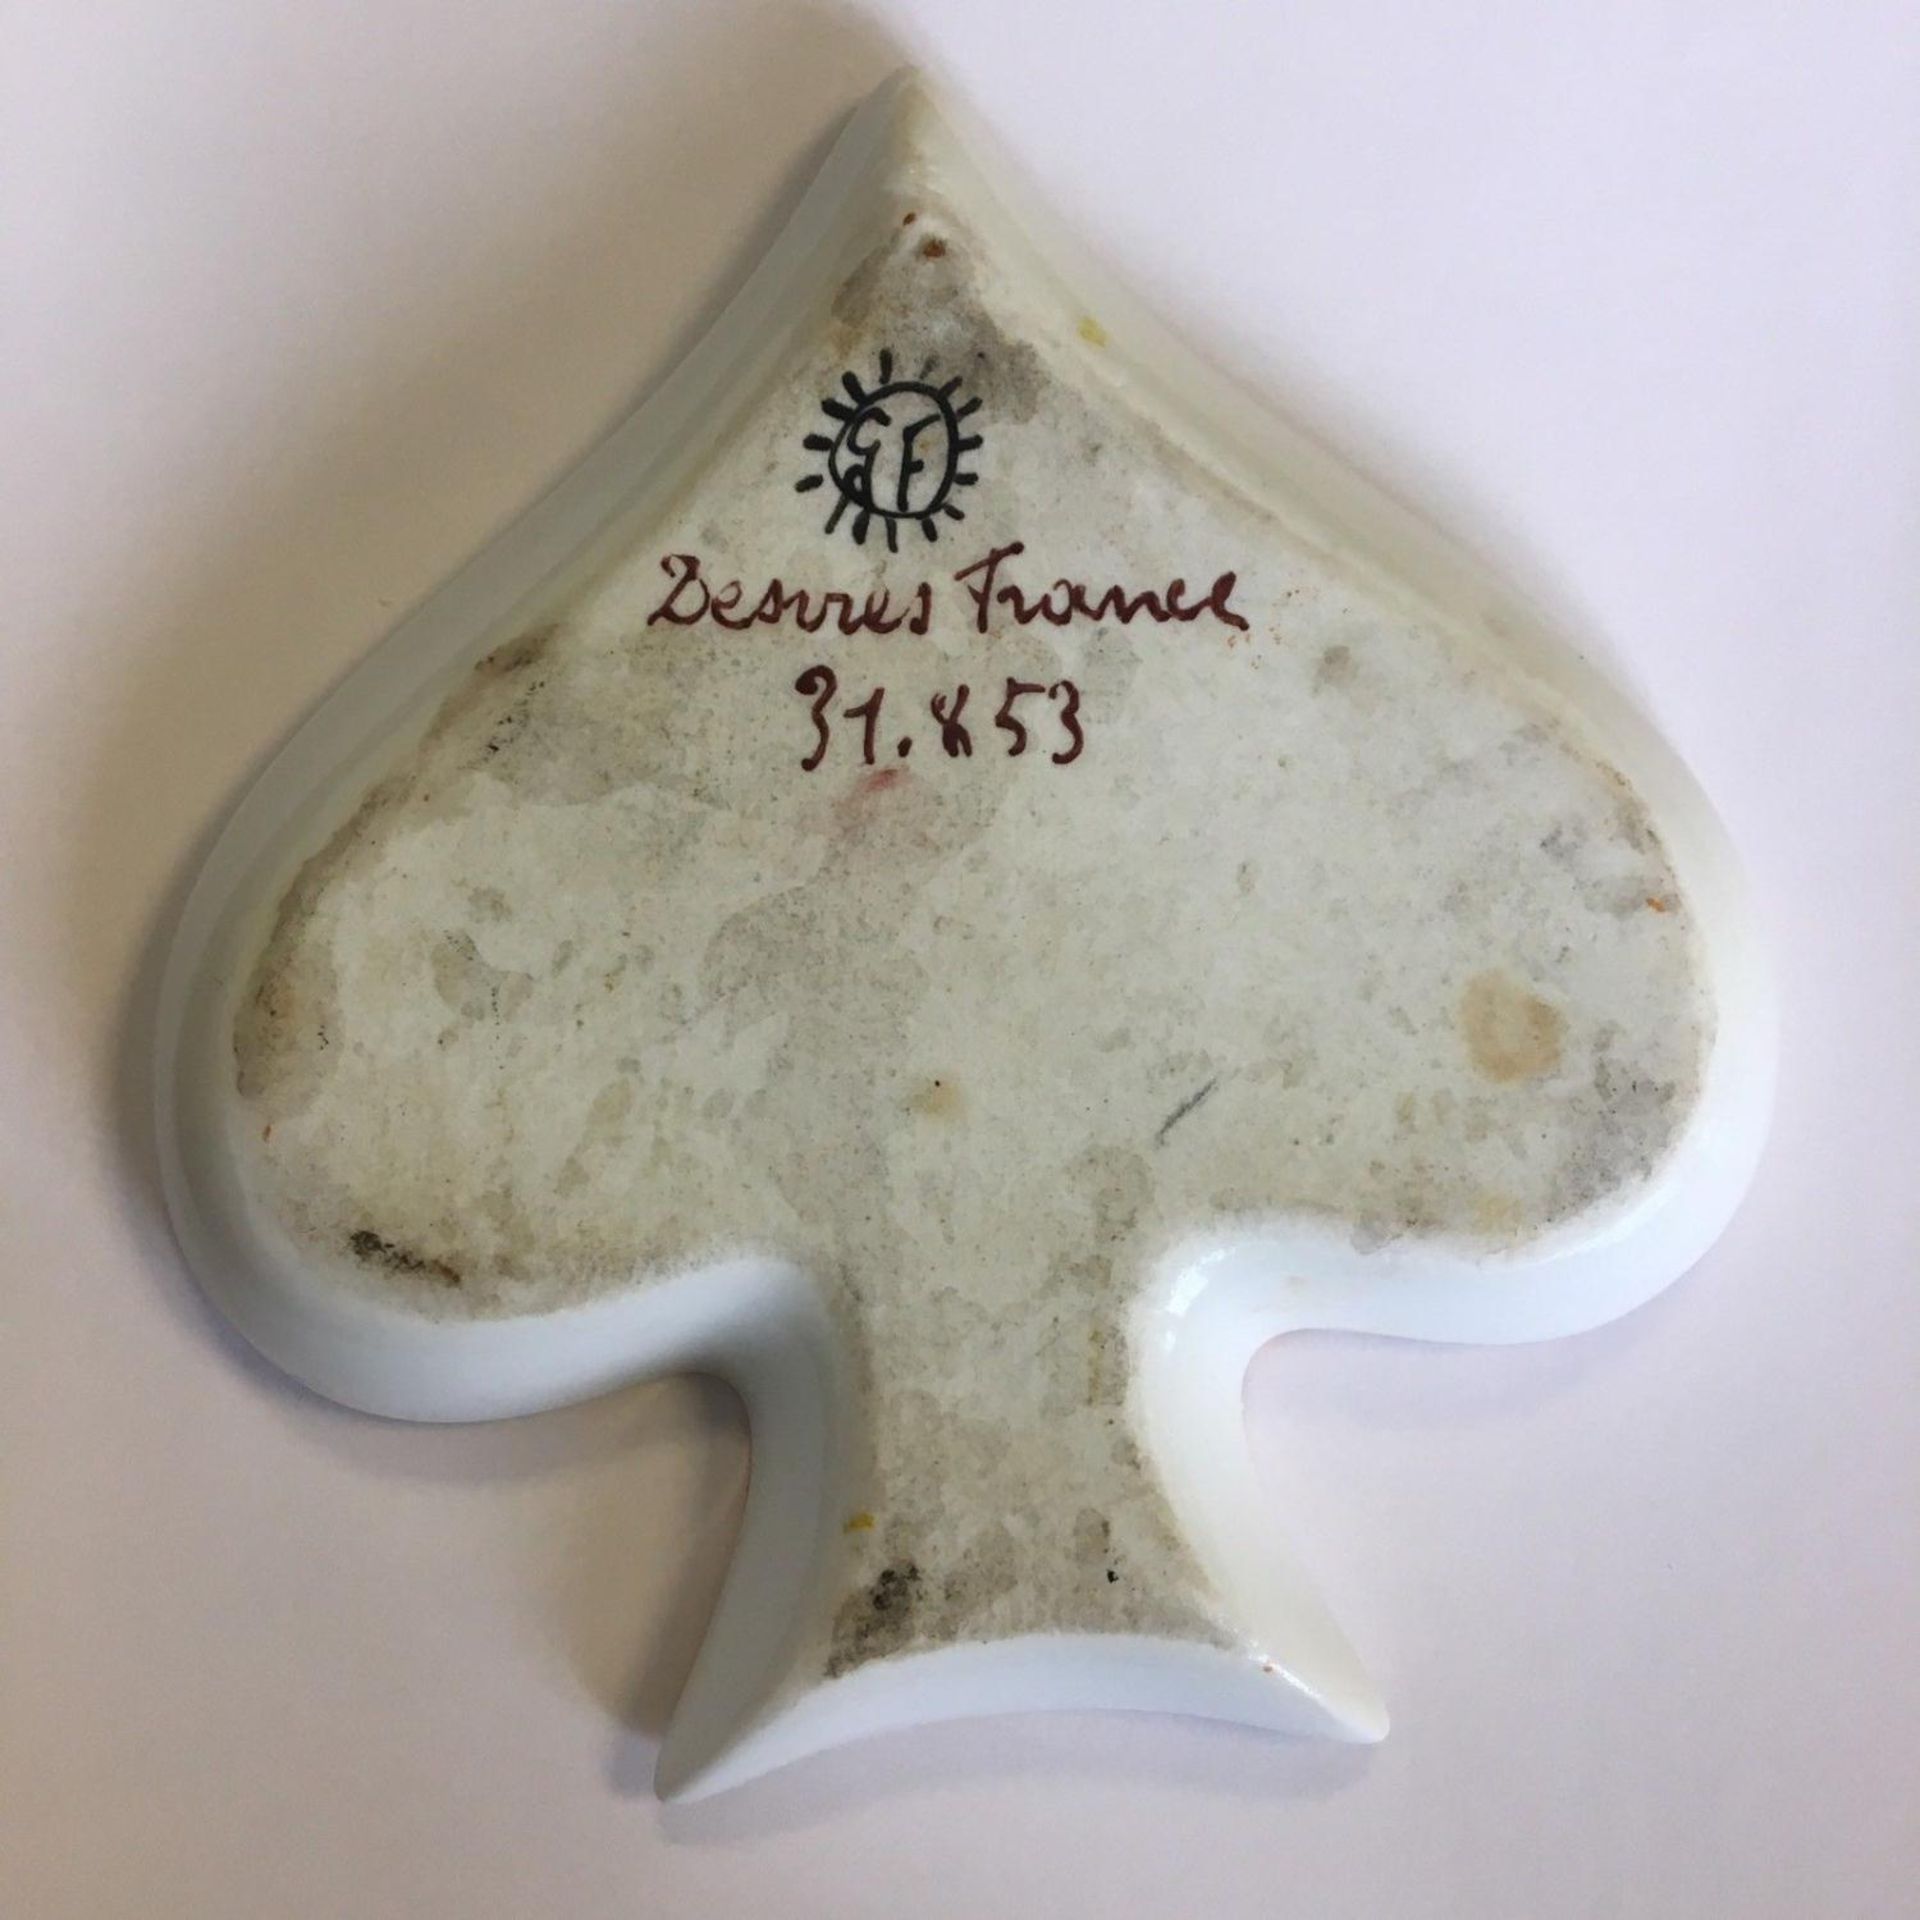 Small unusual hand-painted antique Desvres French Faience porcelain trinket dish - Image 2 of 5